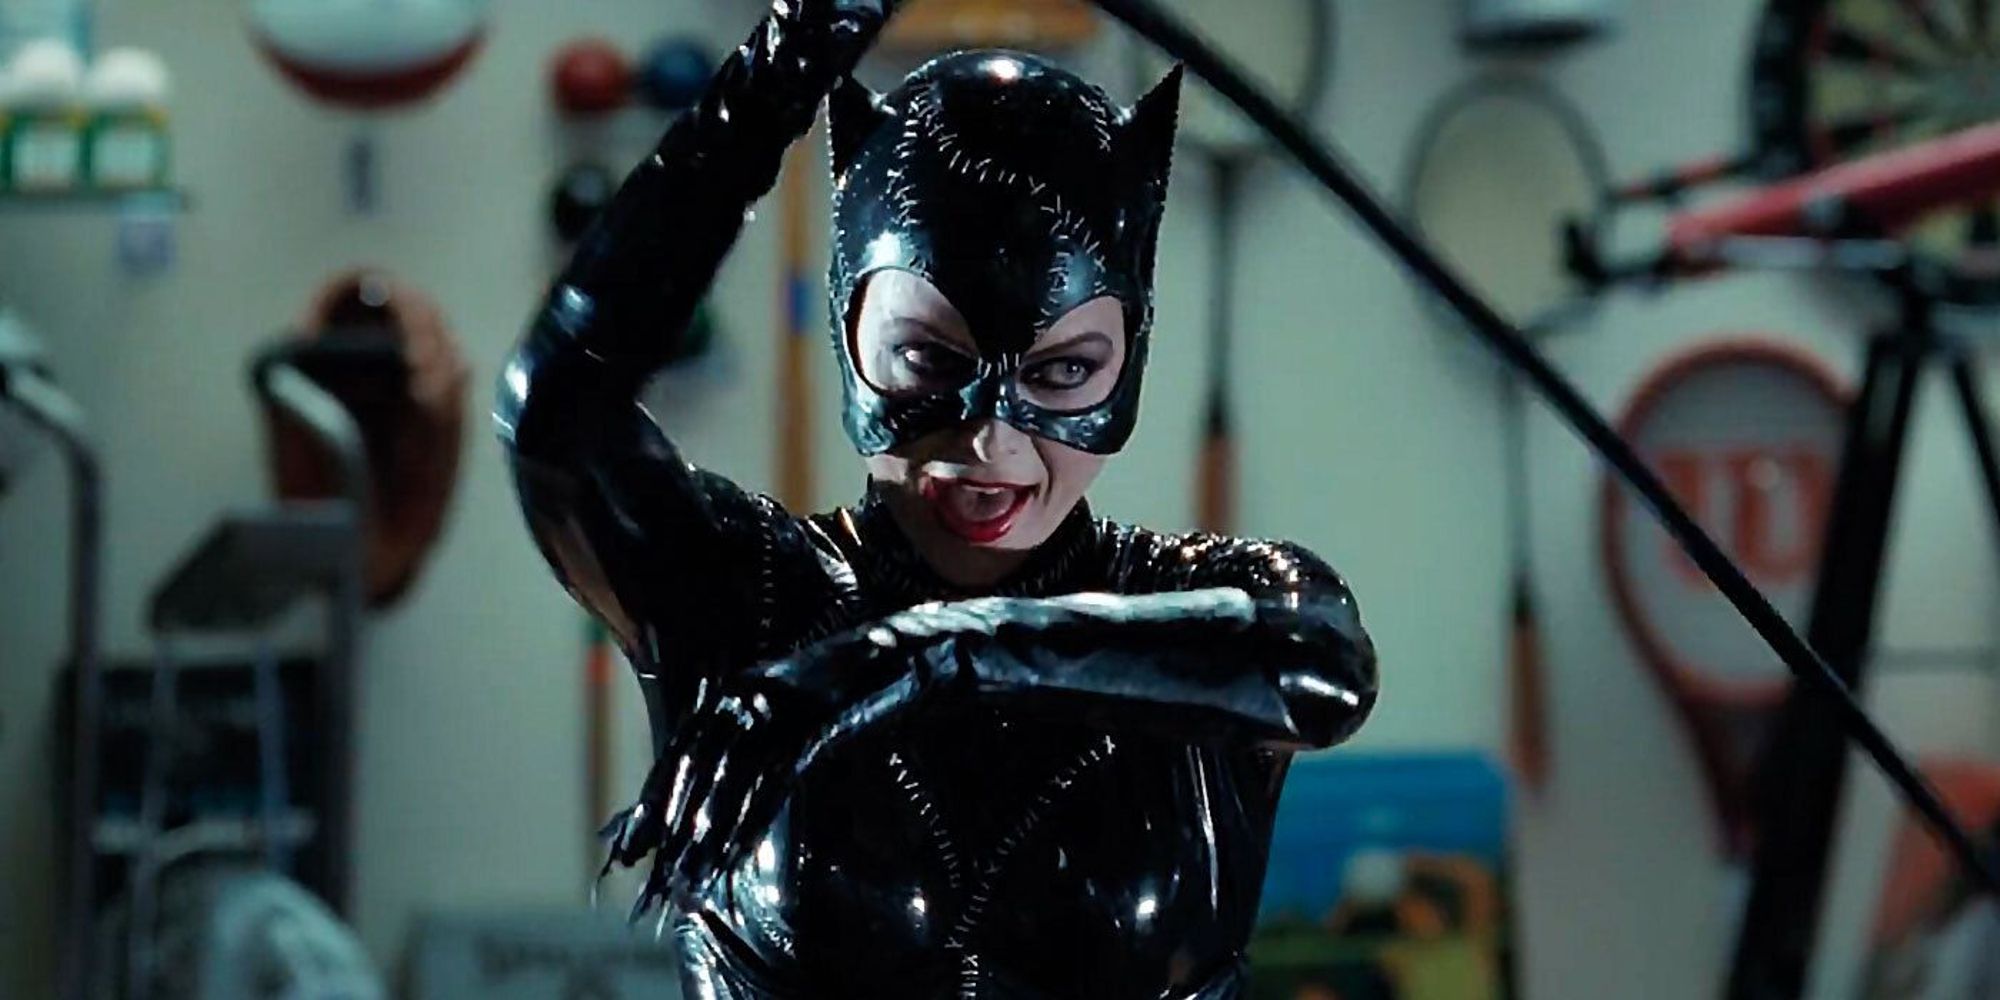 Michelle Pfeiffer as Catwoman wielding her whip in Shreck Plaza in Batman Returns